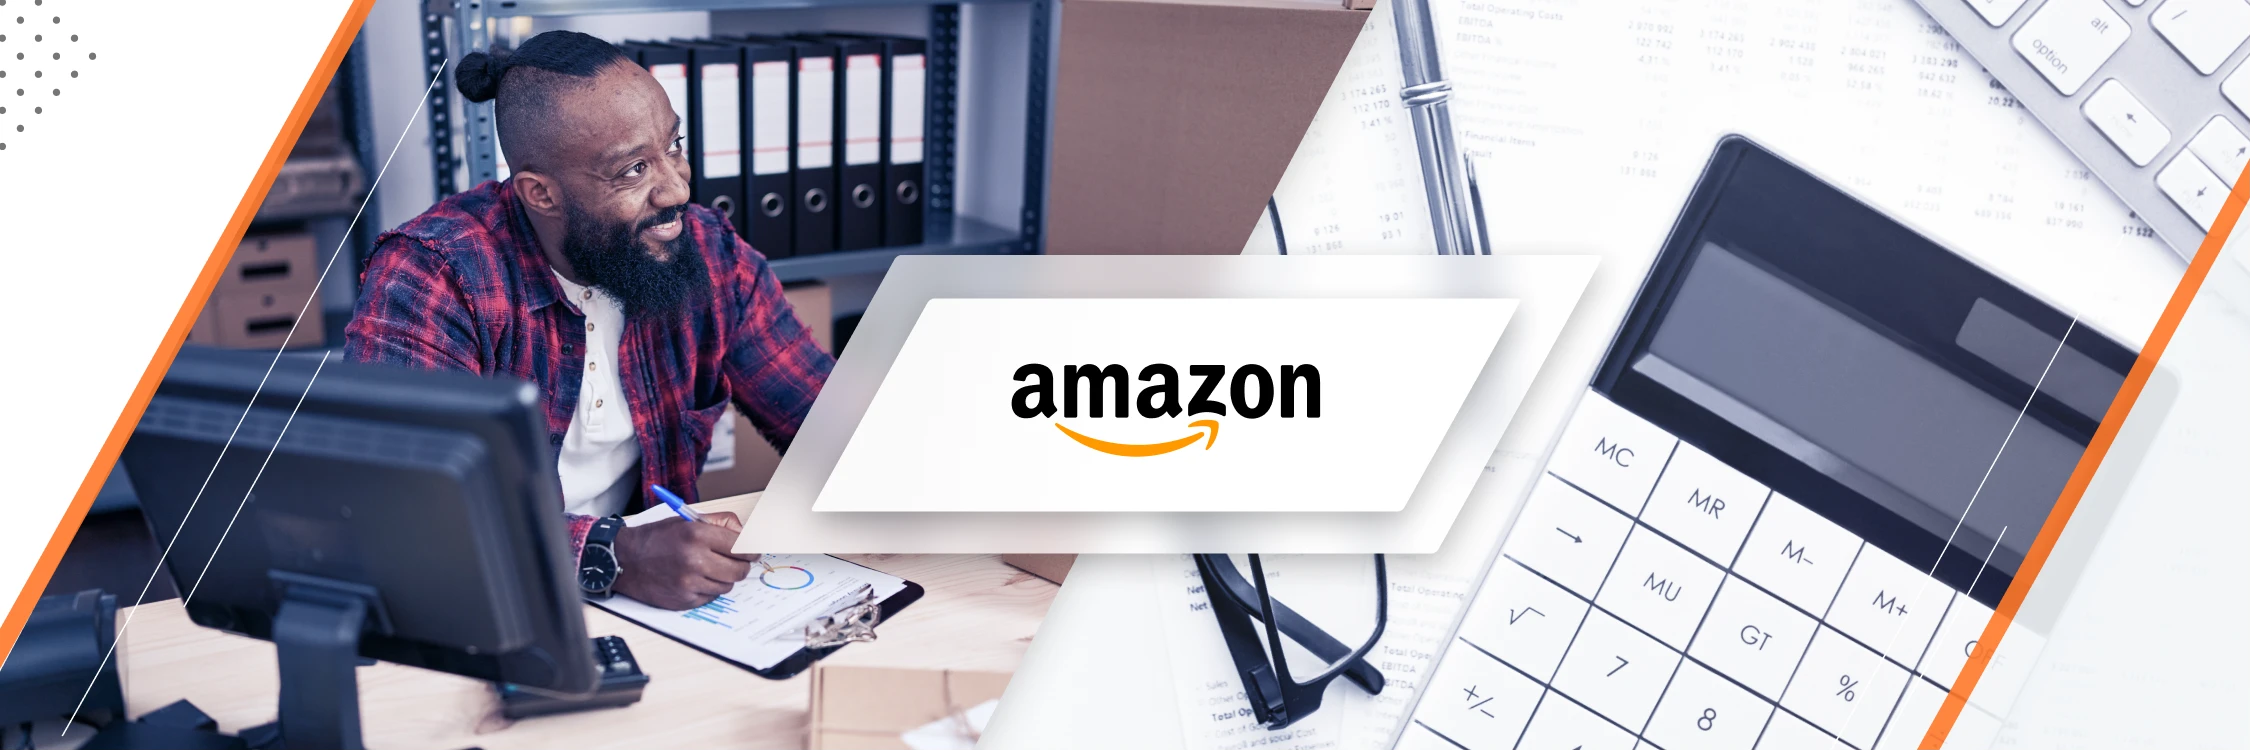 6 Amazon Accounting Problems Solved for Sellers and Accountants